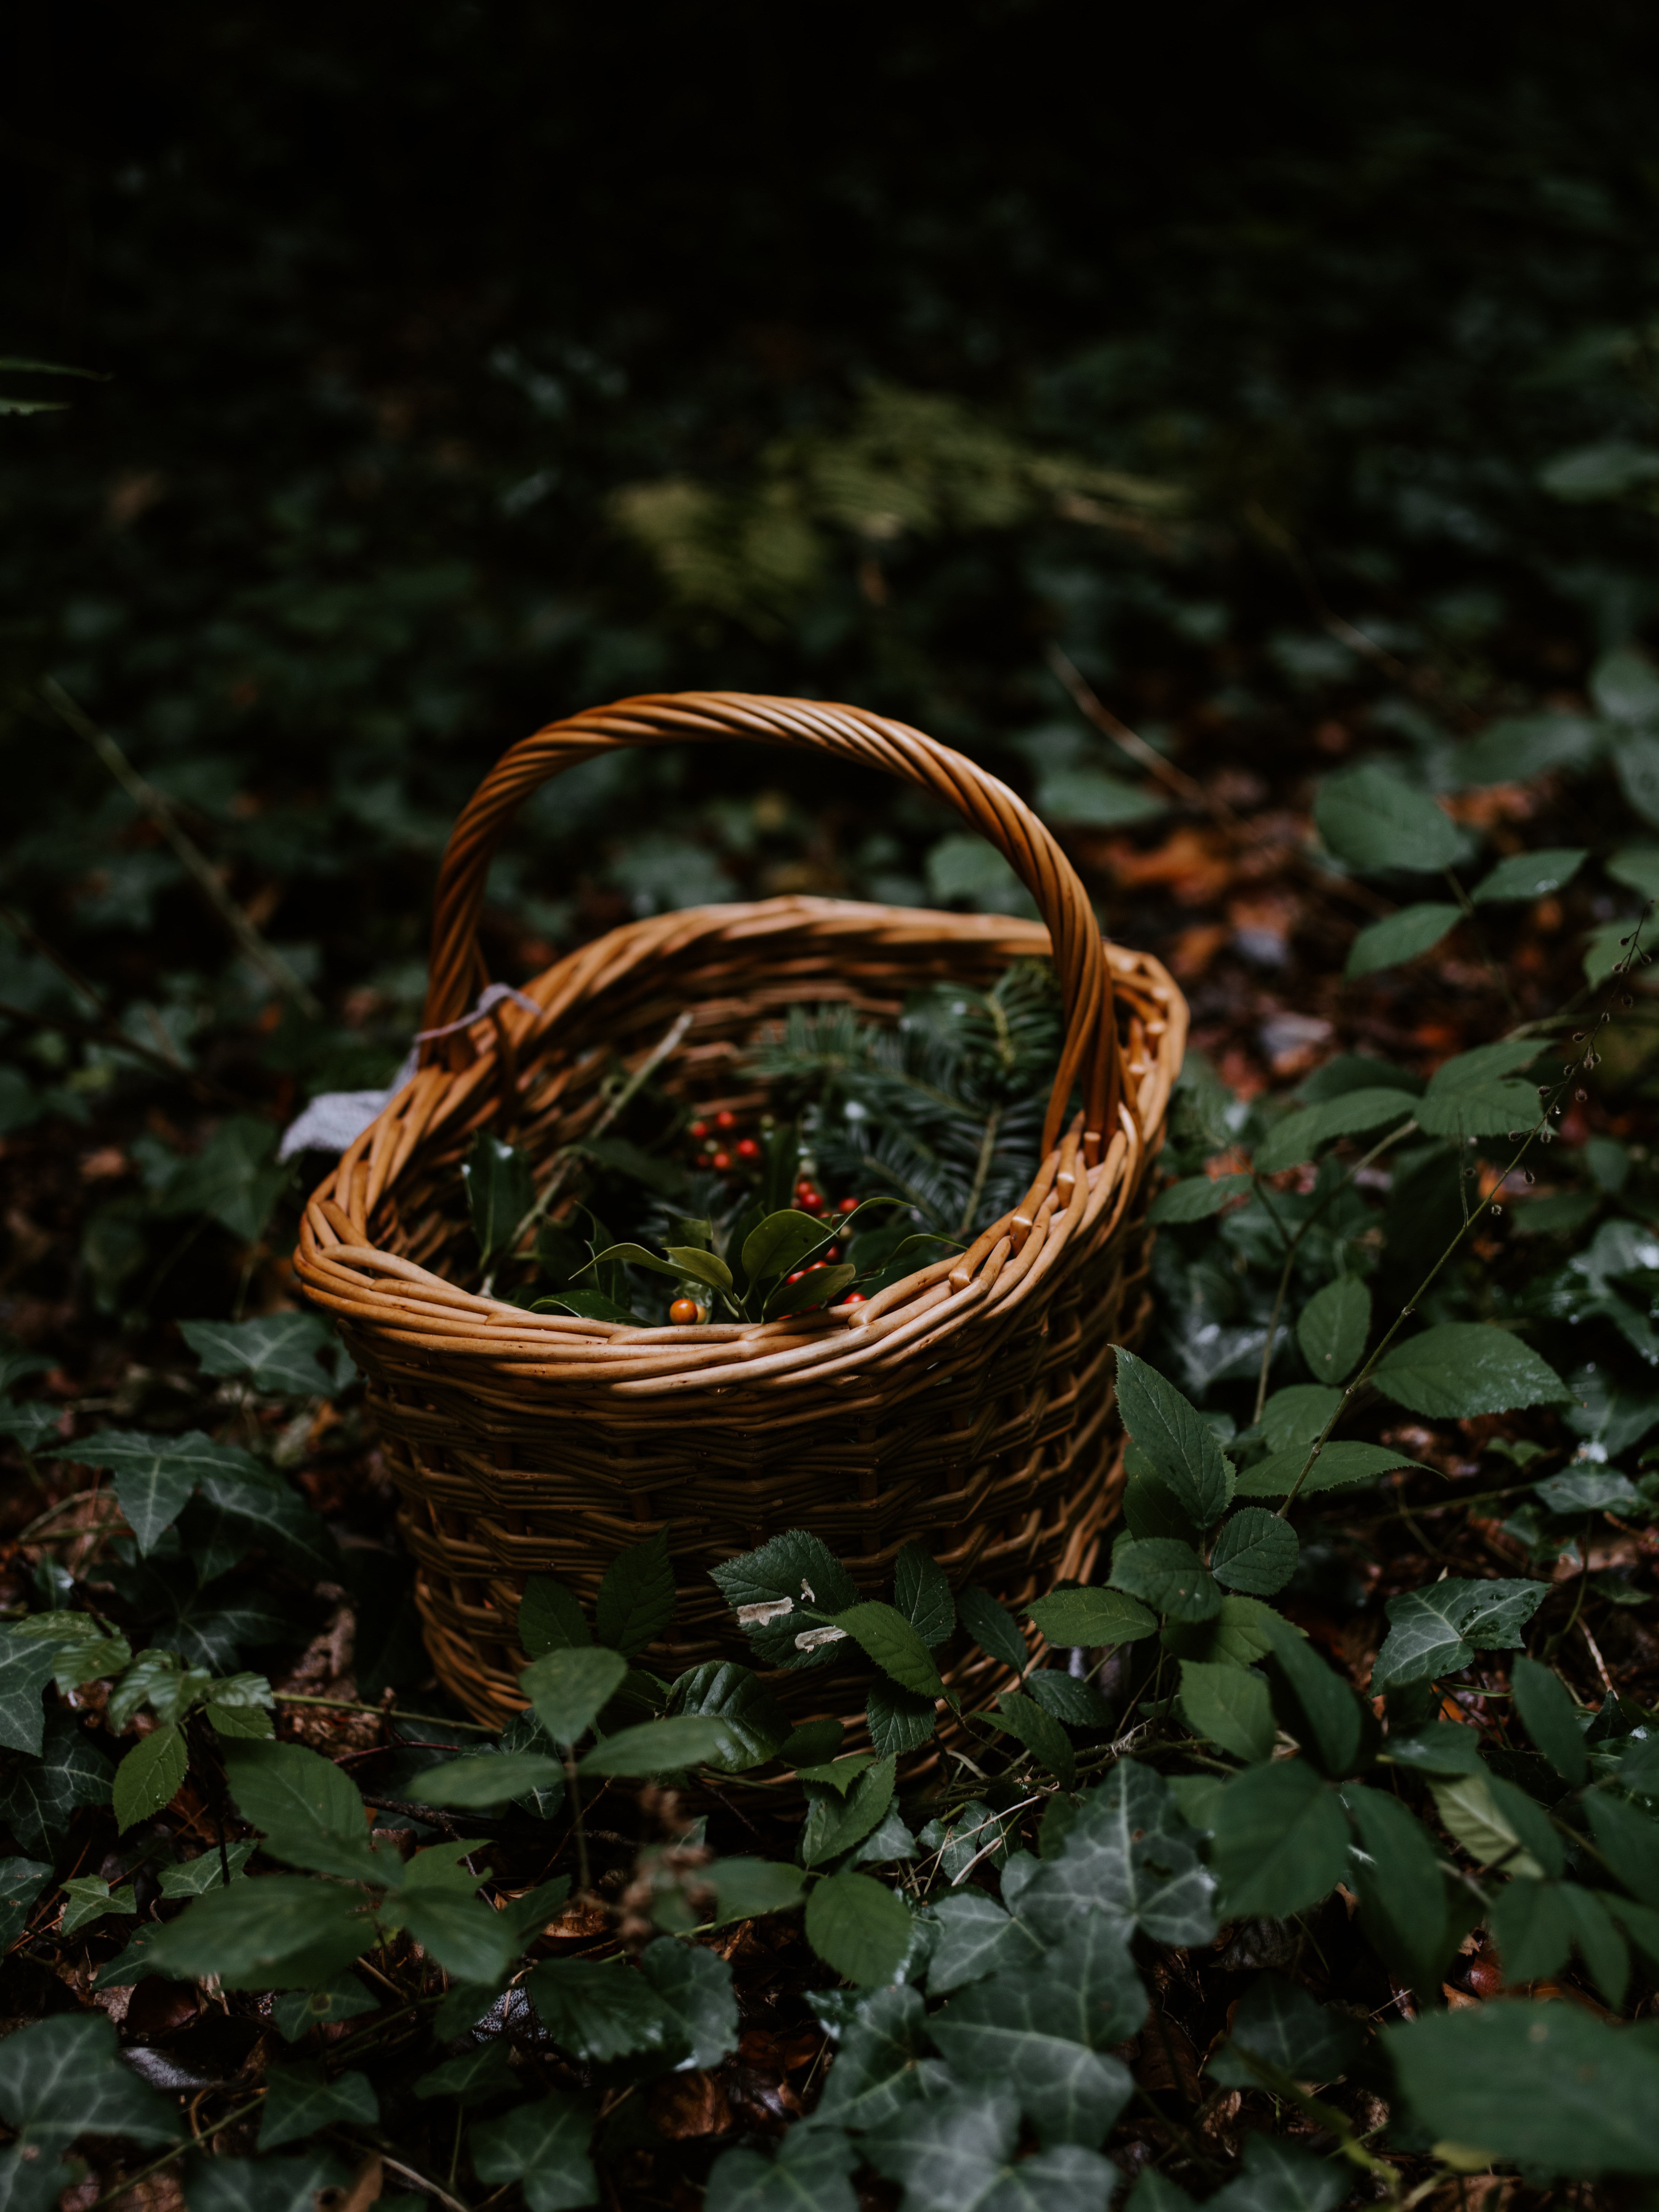 nature, berries, miscellanea, miscellaneous, branches, basket, wicker, braided